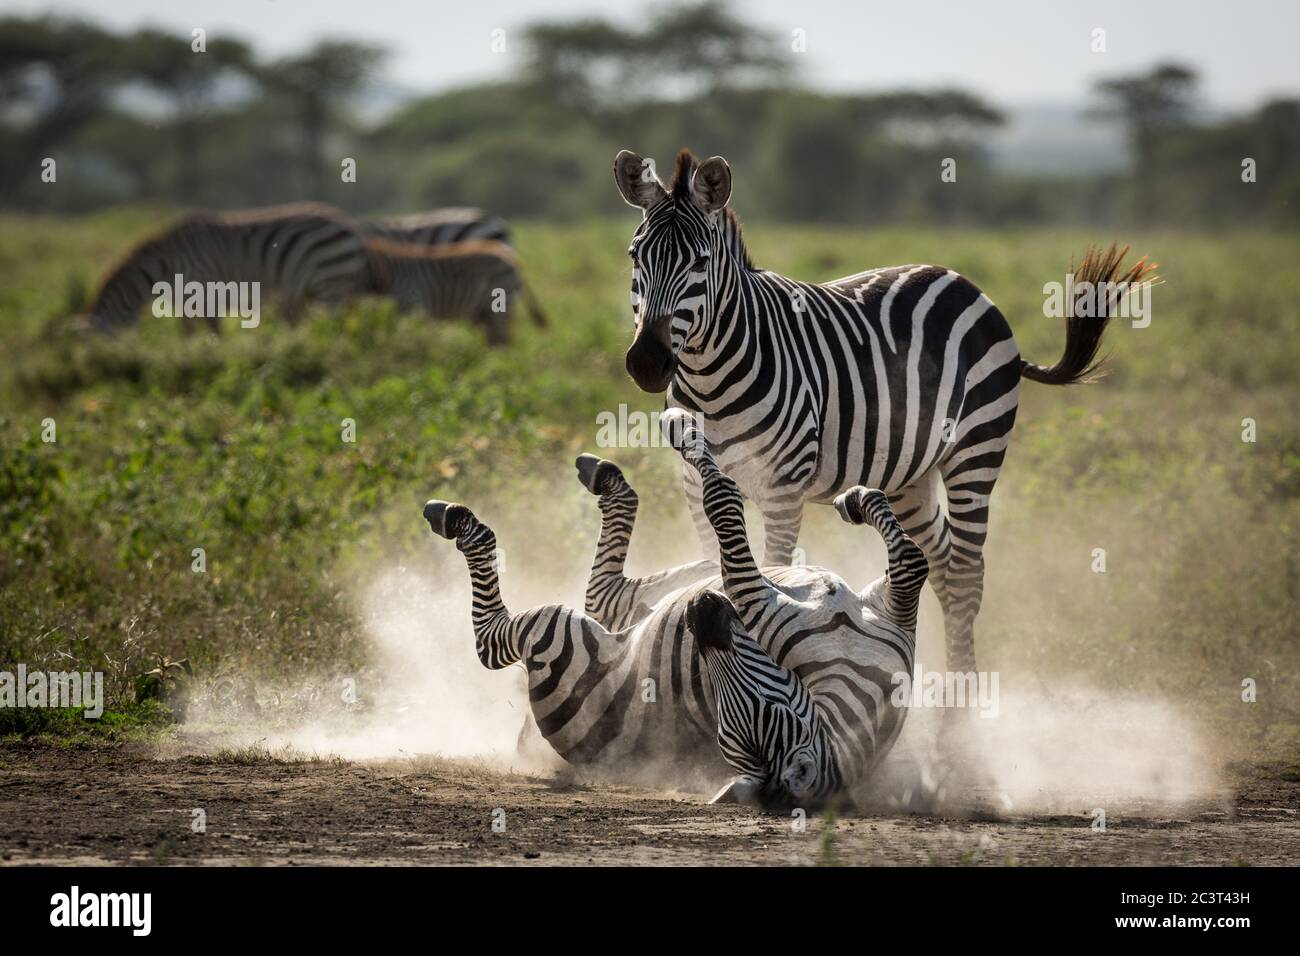 One adult zebra dust bathing with another one watching her in Ndutu Tanzania Stock Photo